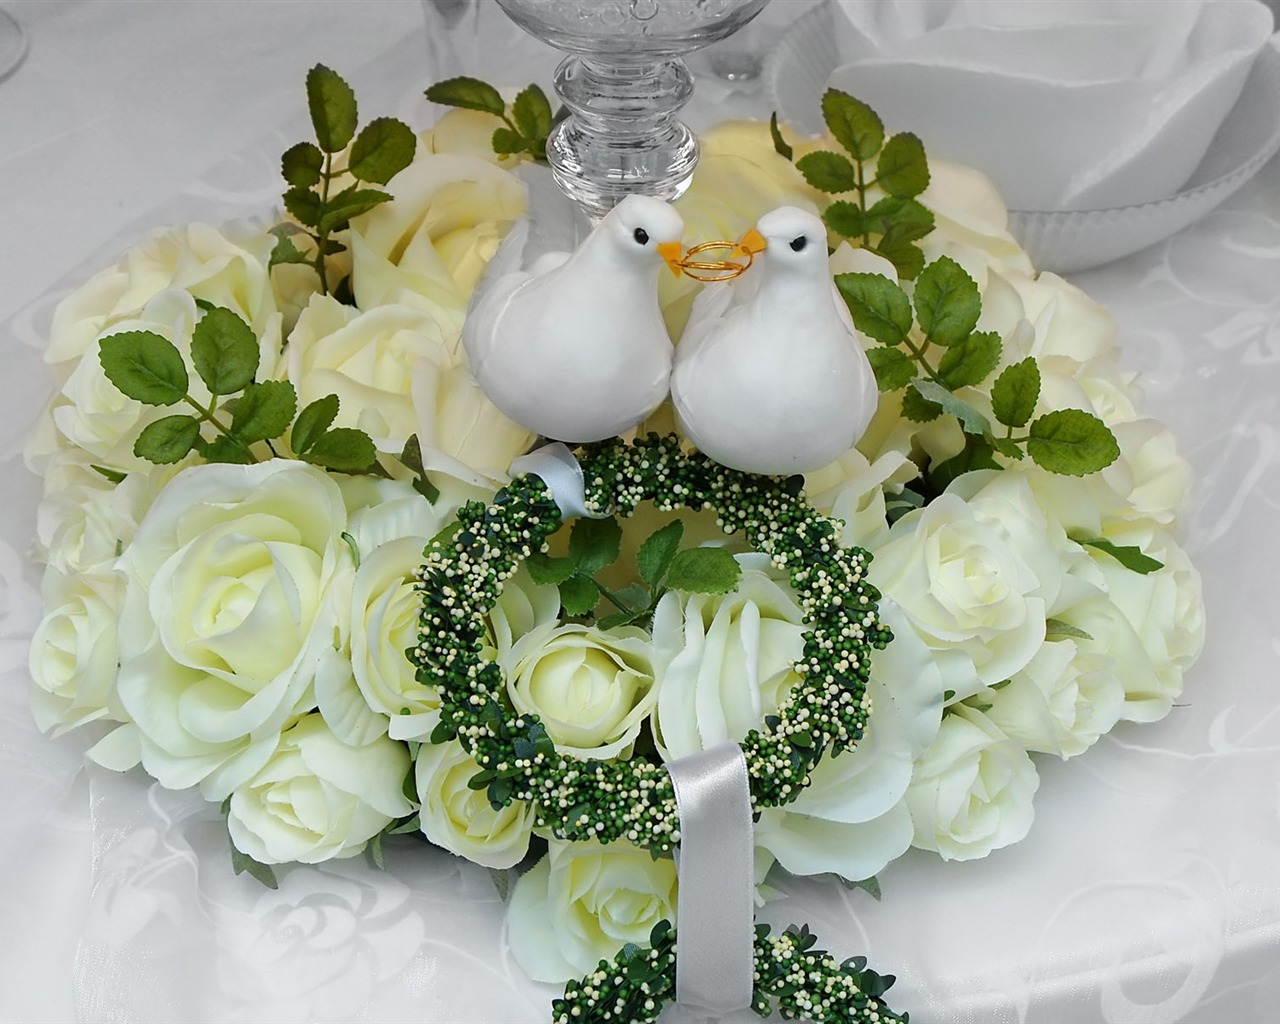 Weddings and Flowers wallpaper (2) #11 - 1280x1024